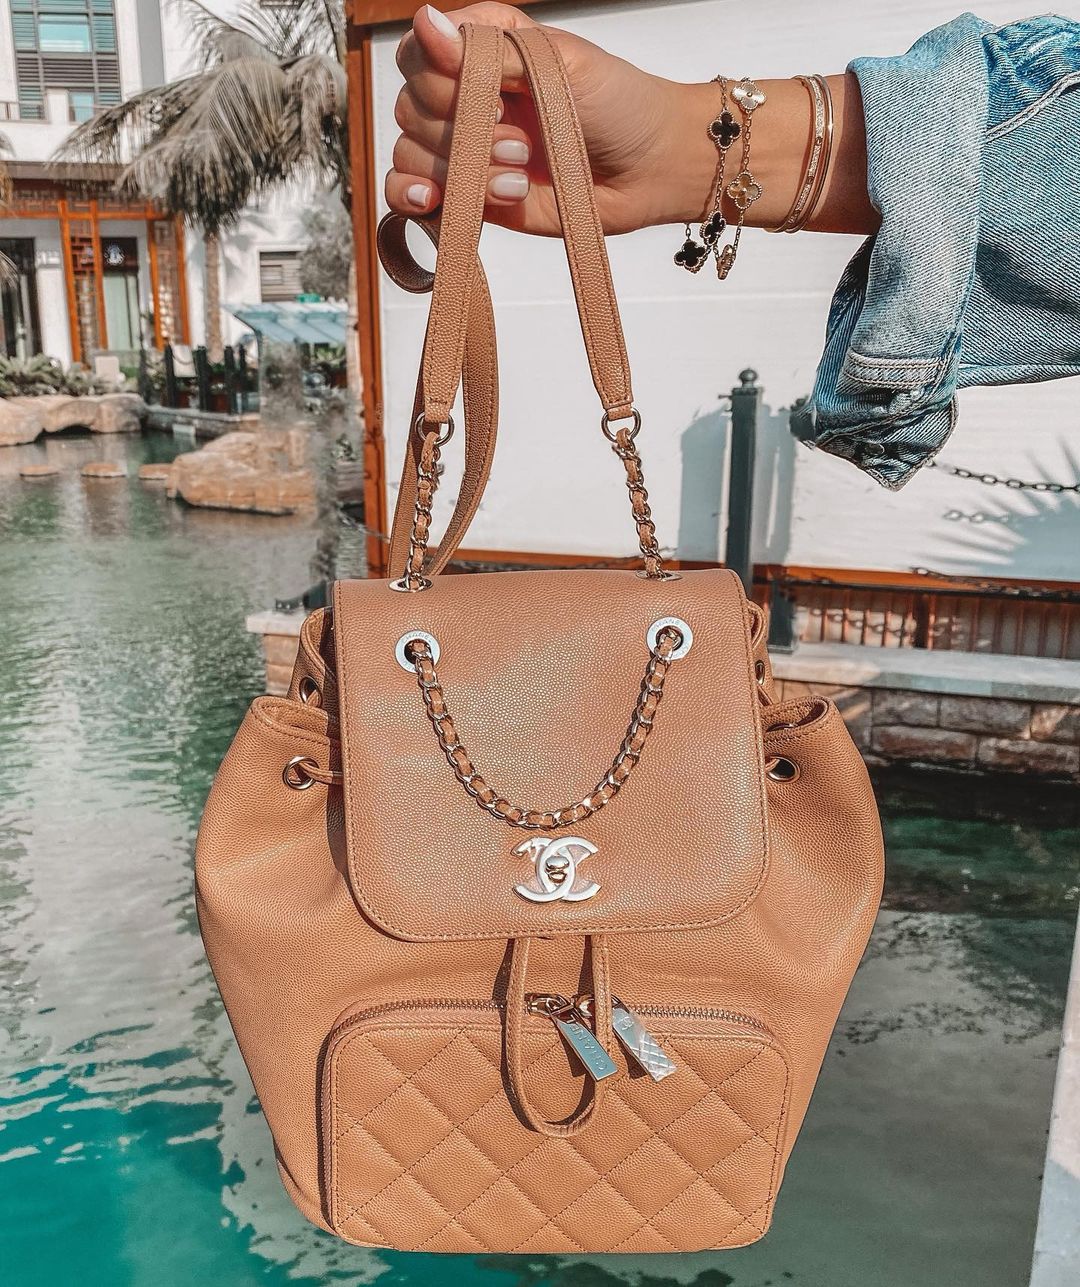 The Luxury Closet - It’s always the perfect day to treat yourself with a new bag, And it’s even more perfect when it’s a Chanel! Visit our website and app to check out our wide variety of exclusive ba...